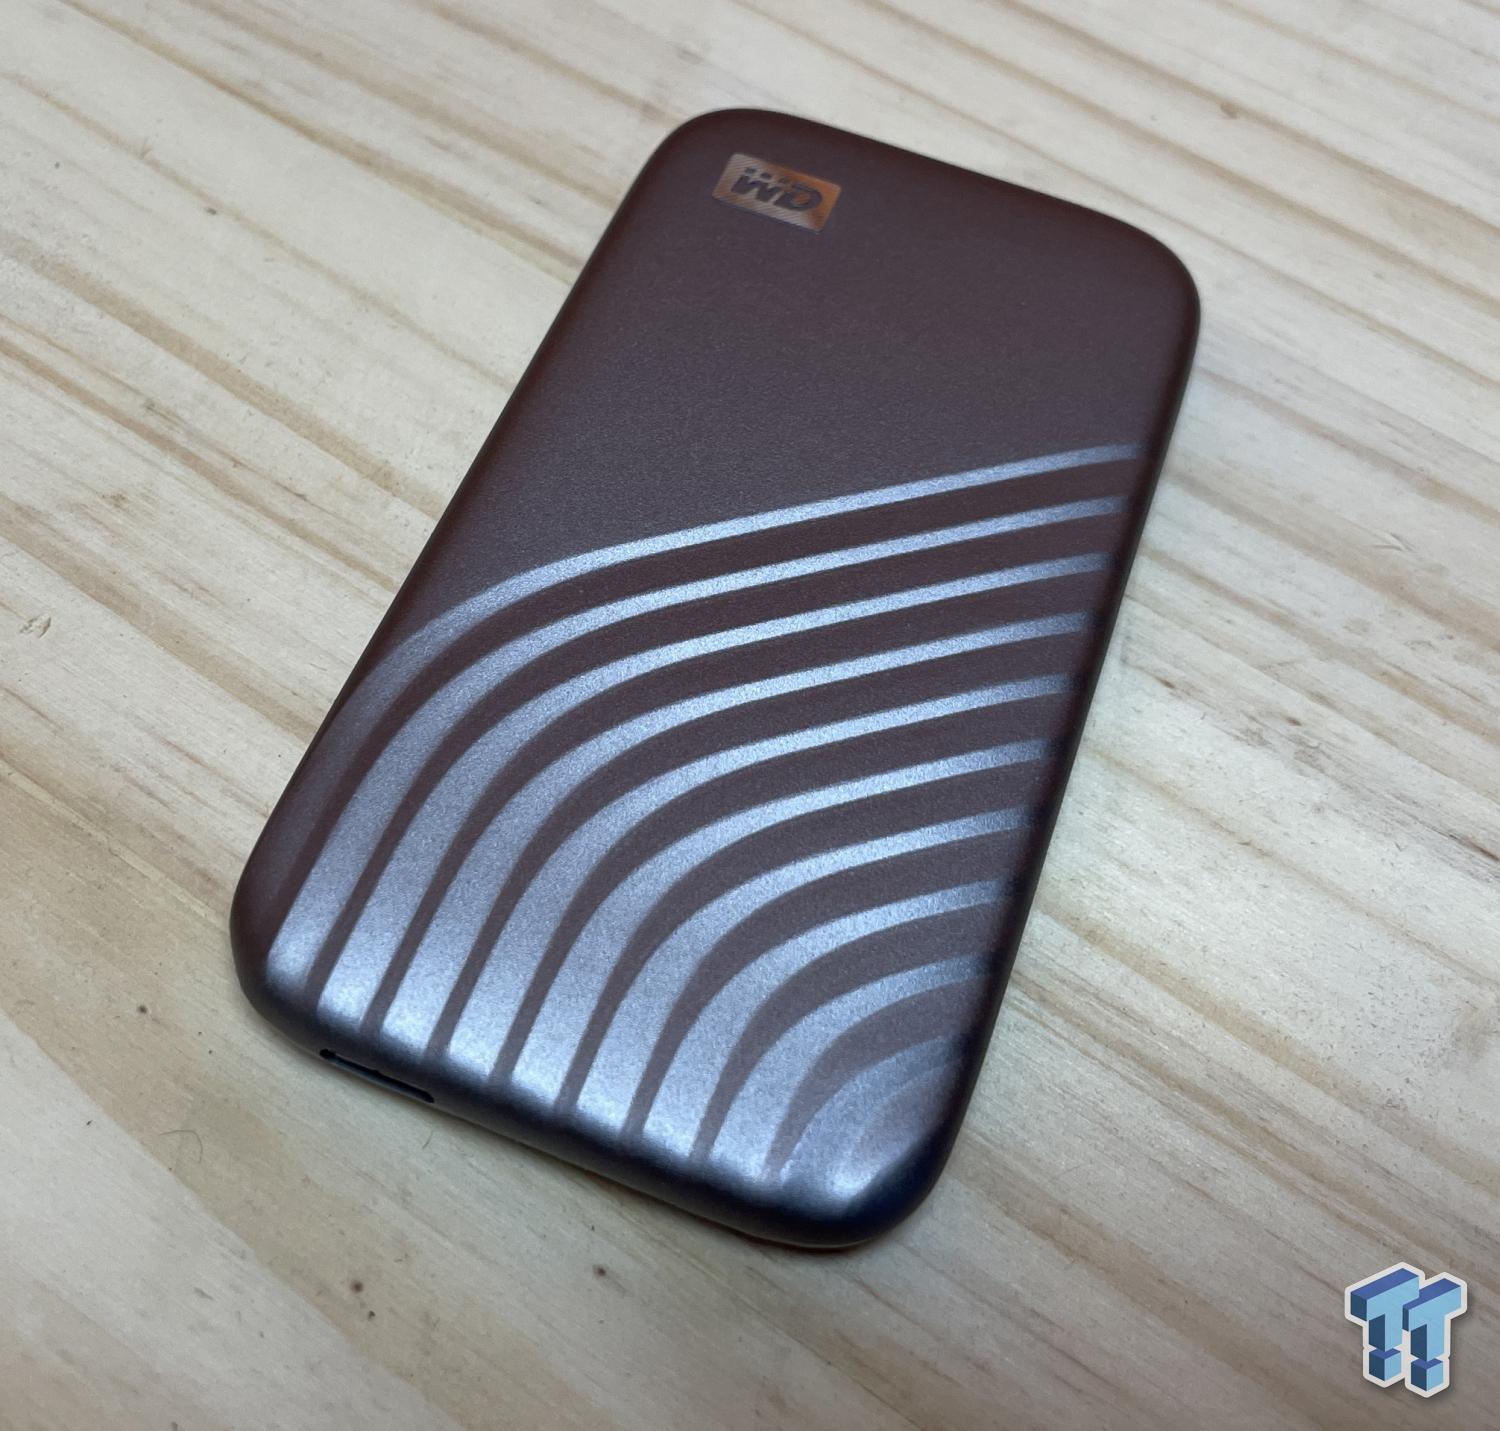 WD My Passport SSD SSD Portable 4TB Review